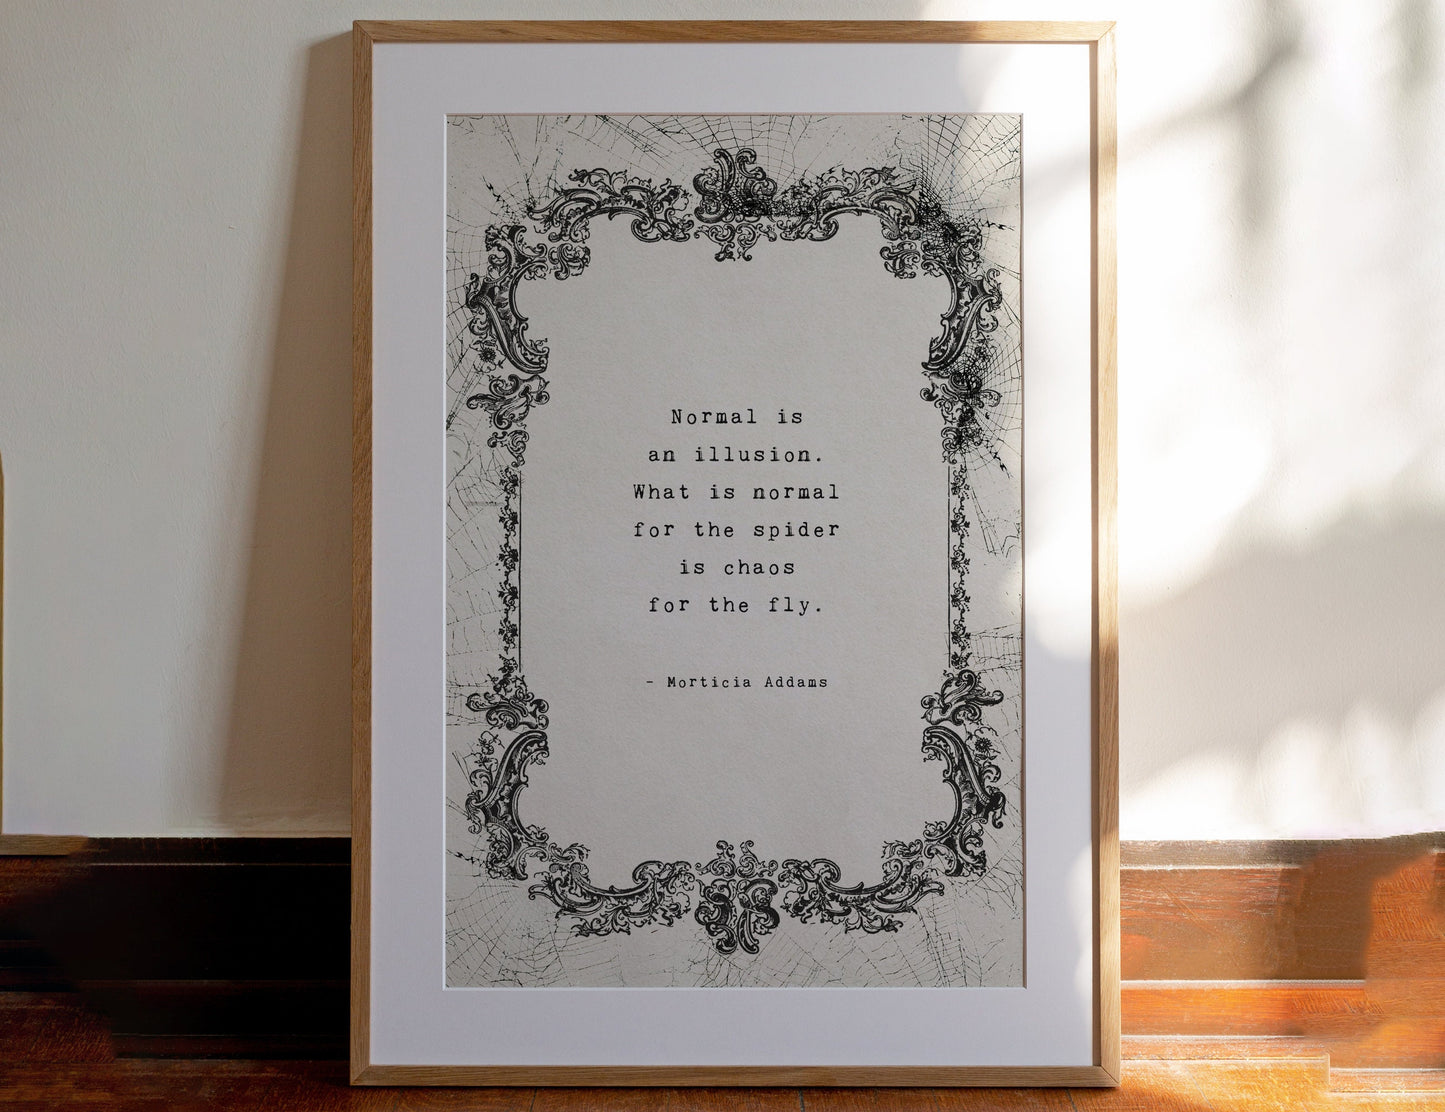 Morticia Addams quote art "Normal is an illusion. What is normal for the spider is chaos for the fly" goth art print